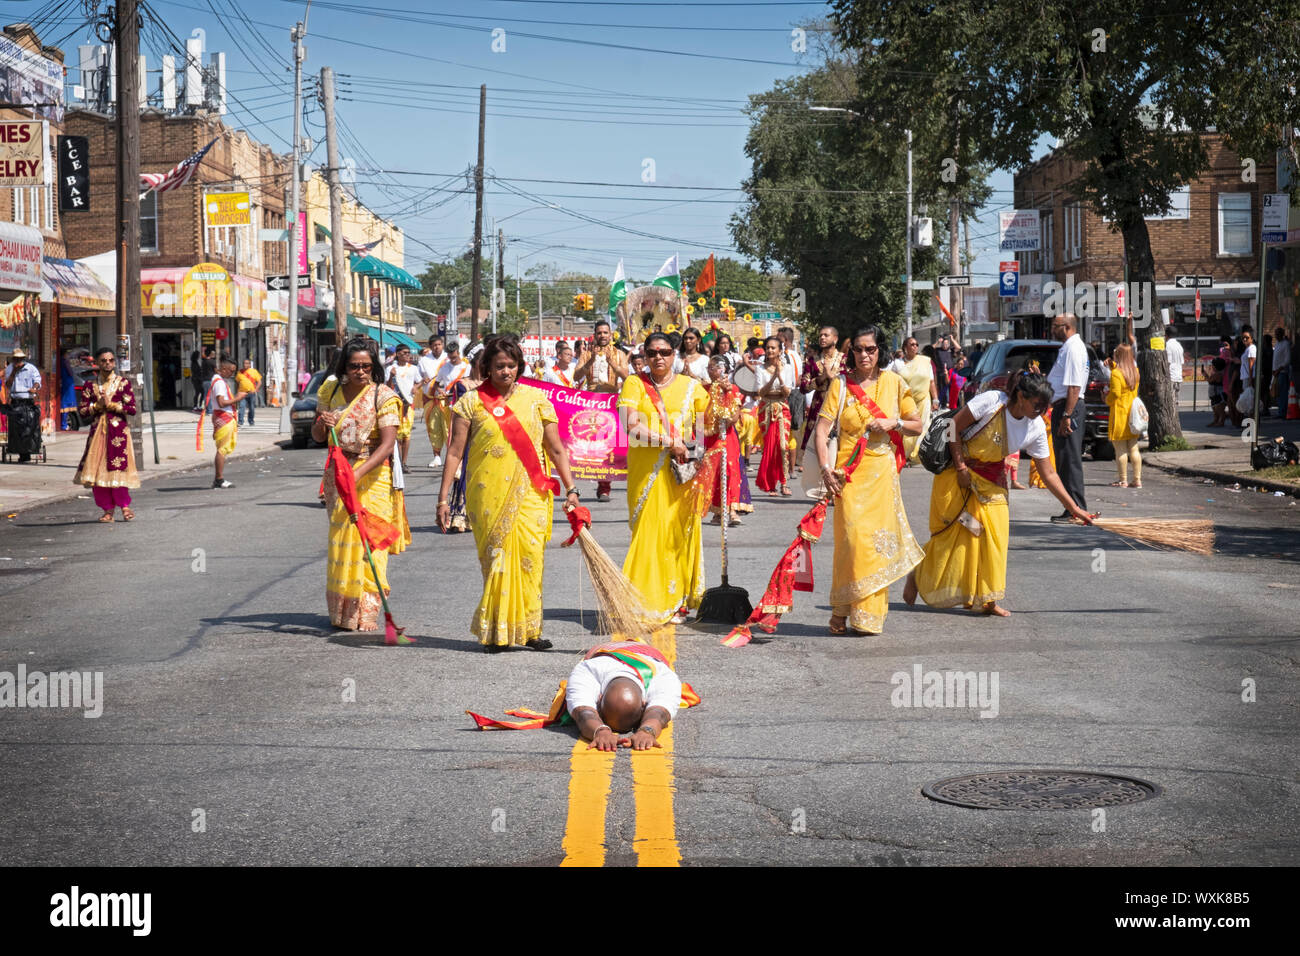 A devout Hindu worshipper lies prostrate in fervent prayer at the Madrassi Parade for unity in the community. In Richmond Hill, Queens. Stock Photo